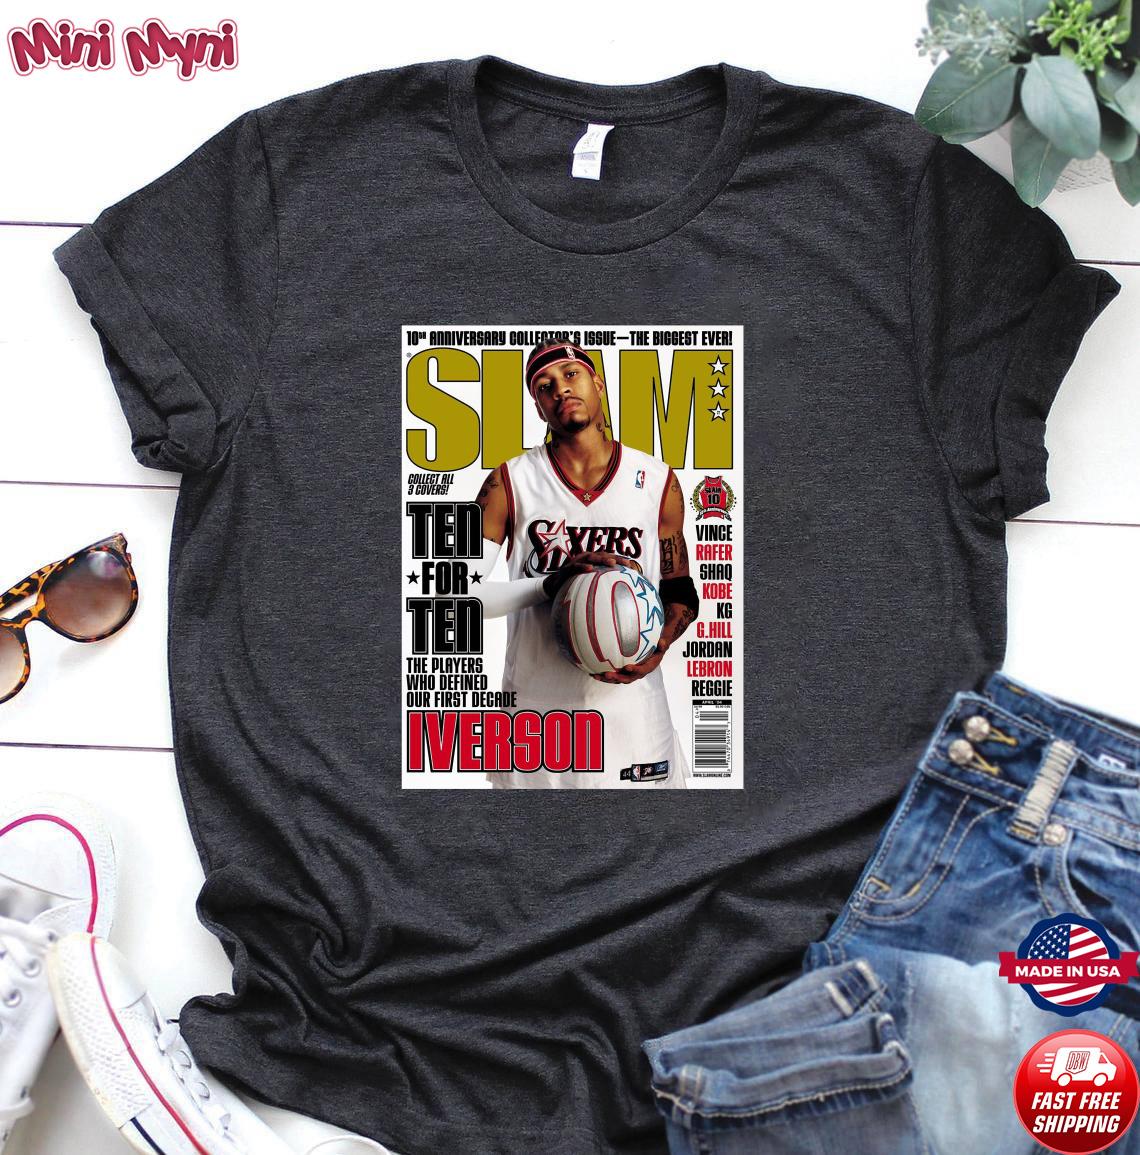 Slam Allen Iverson The Players Who Defined Our First Date shirt